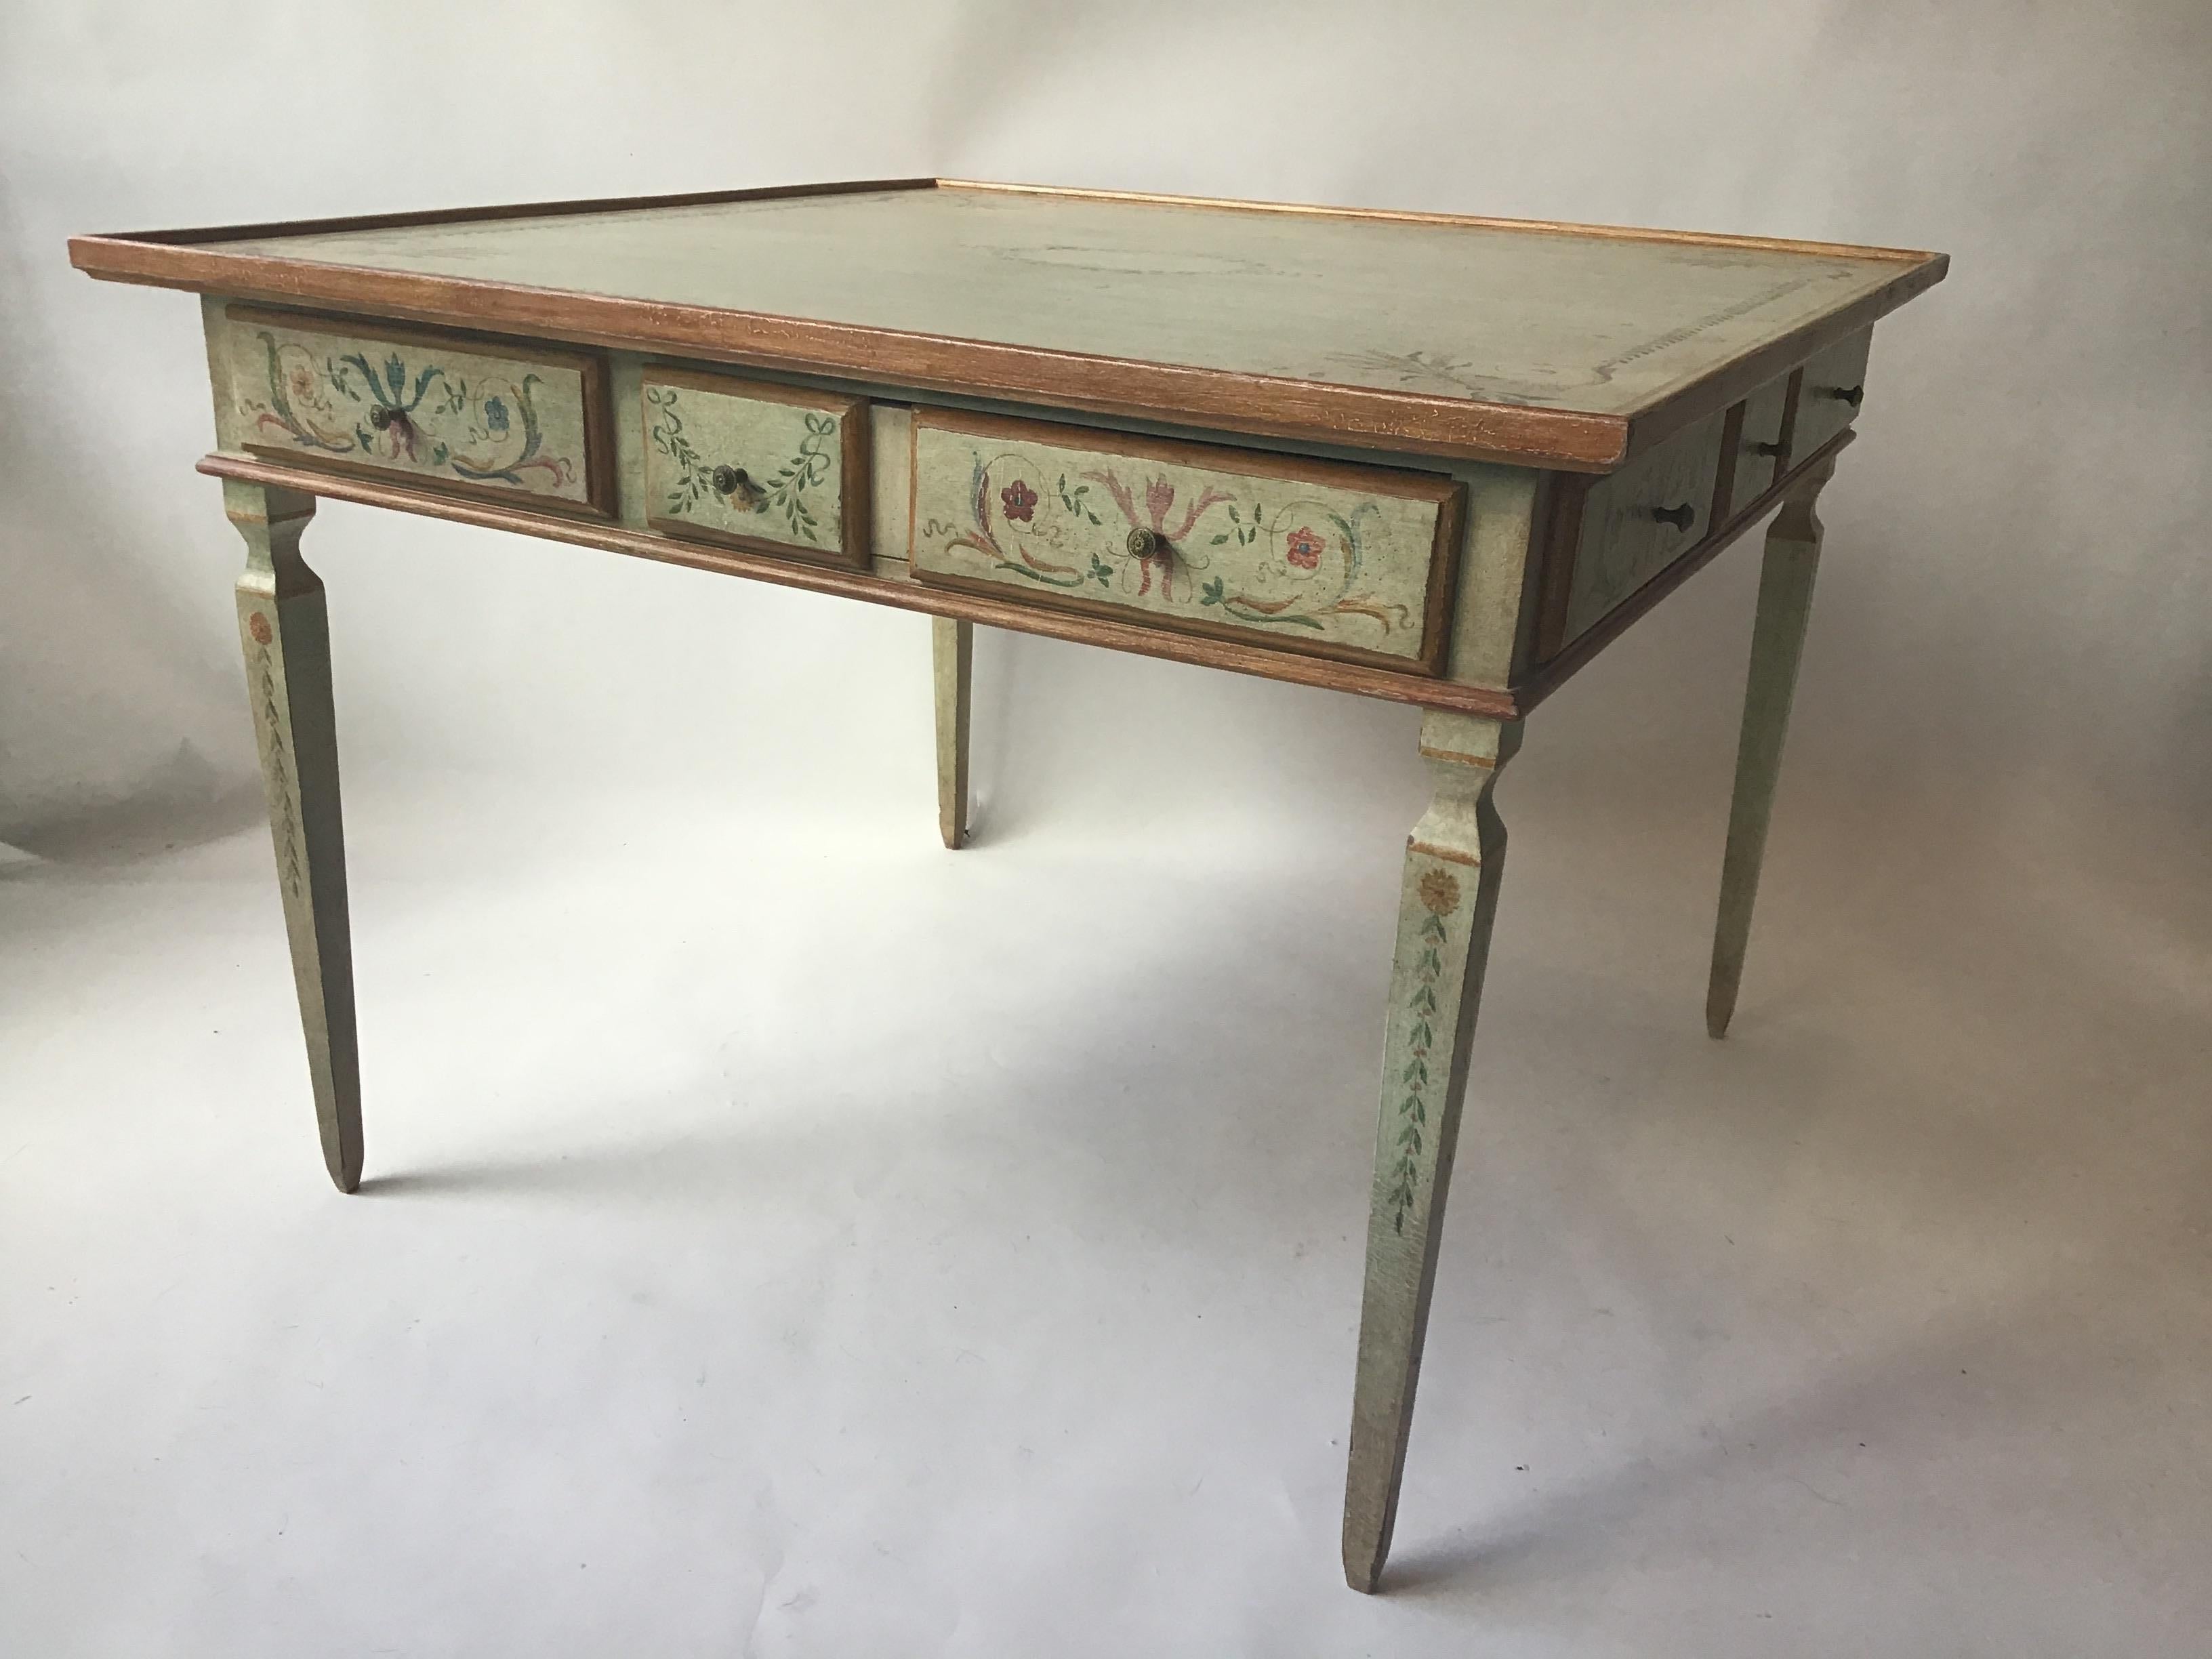 Julia Gray hand painted oversized 4 drawer game table. From an East Hampton, N.Y. estate.